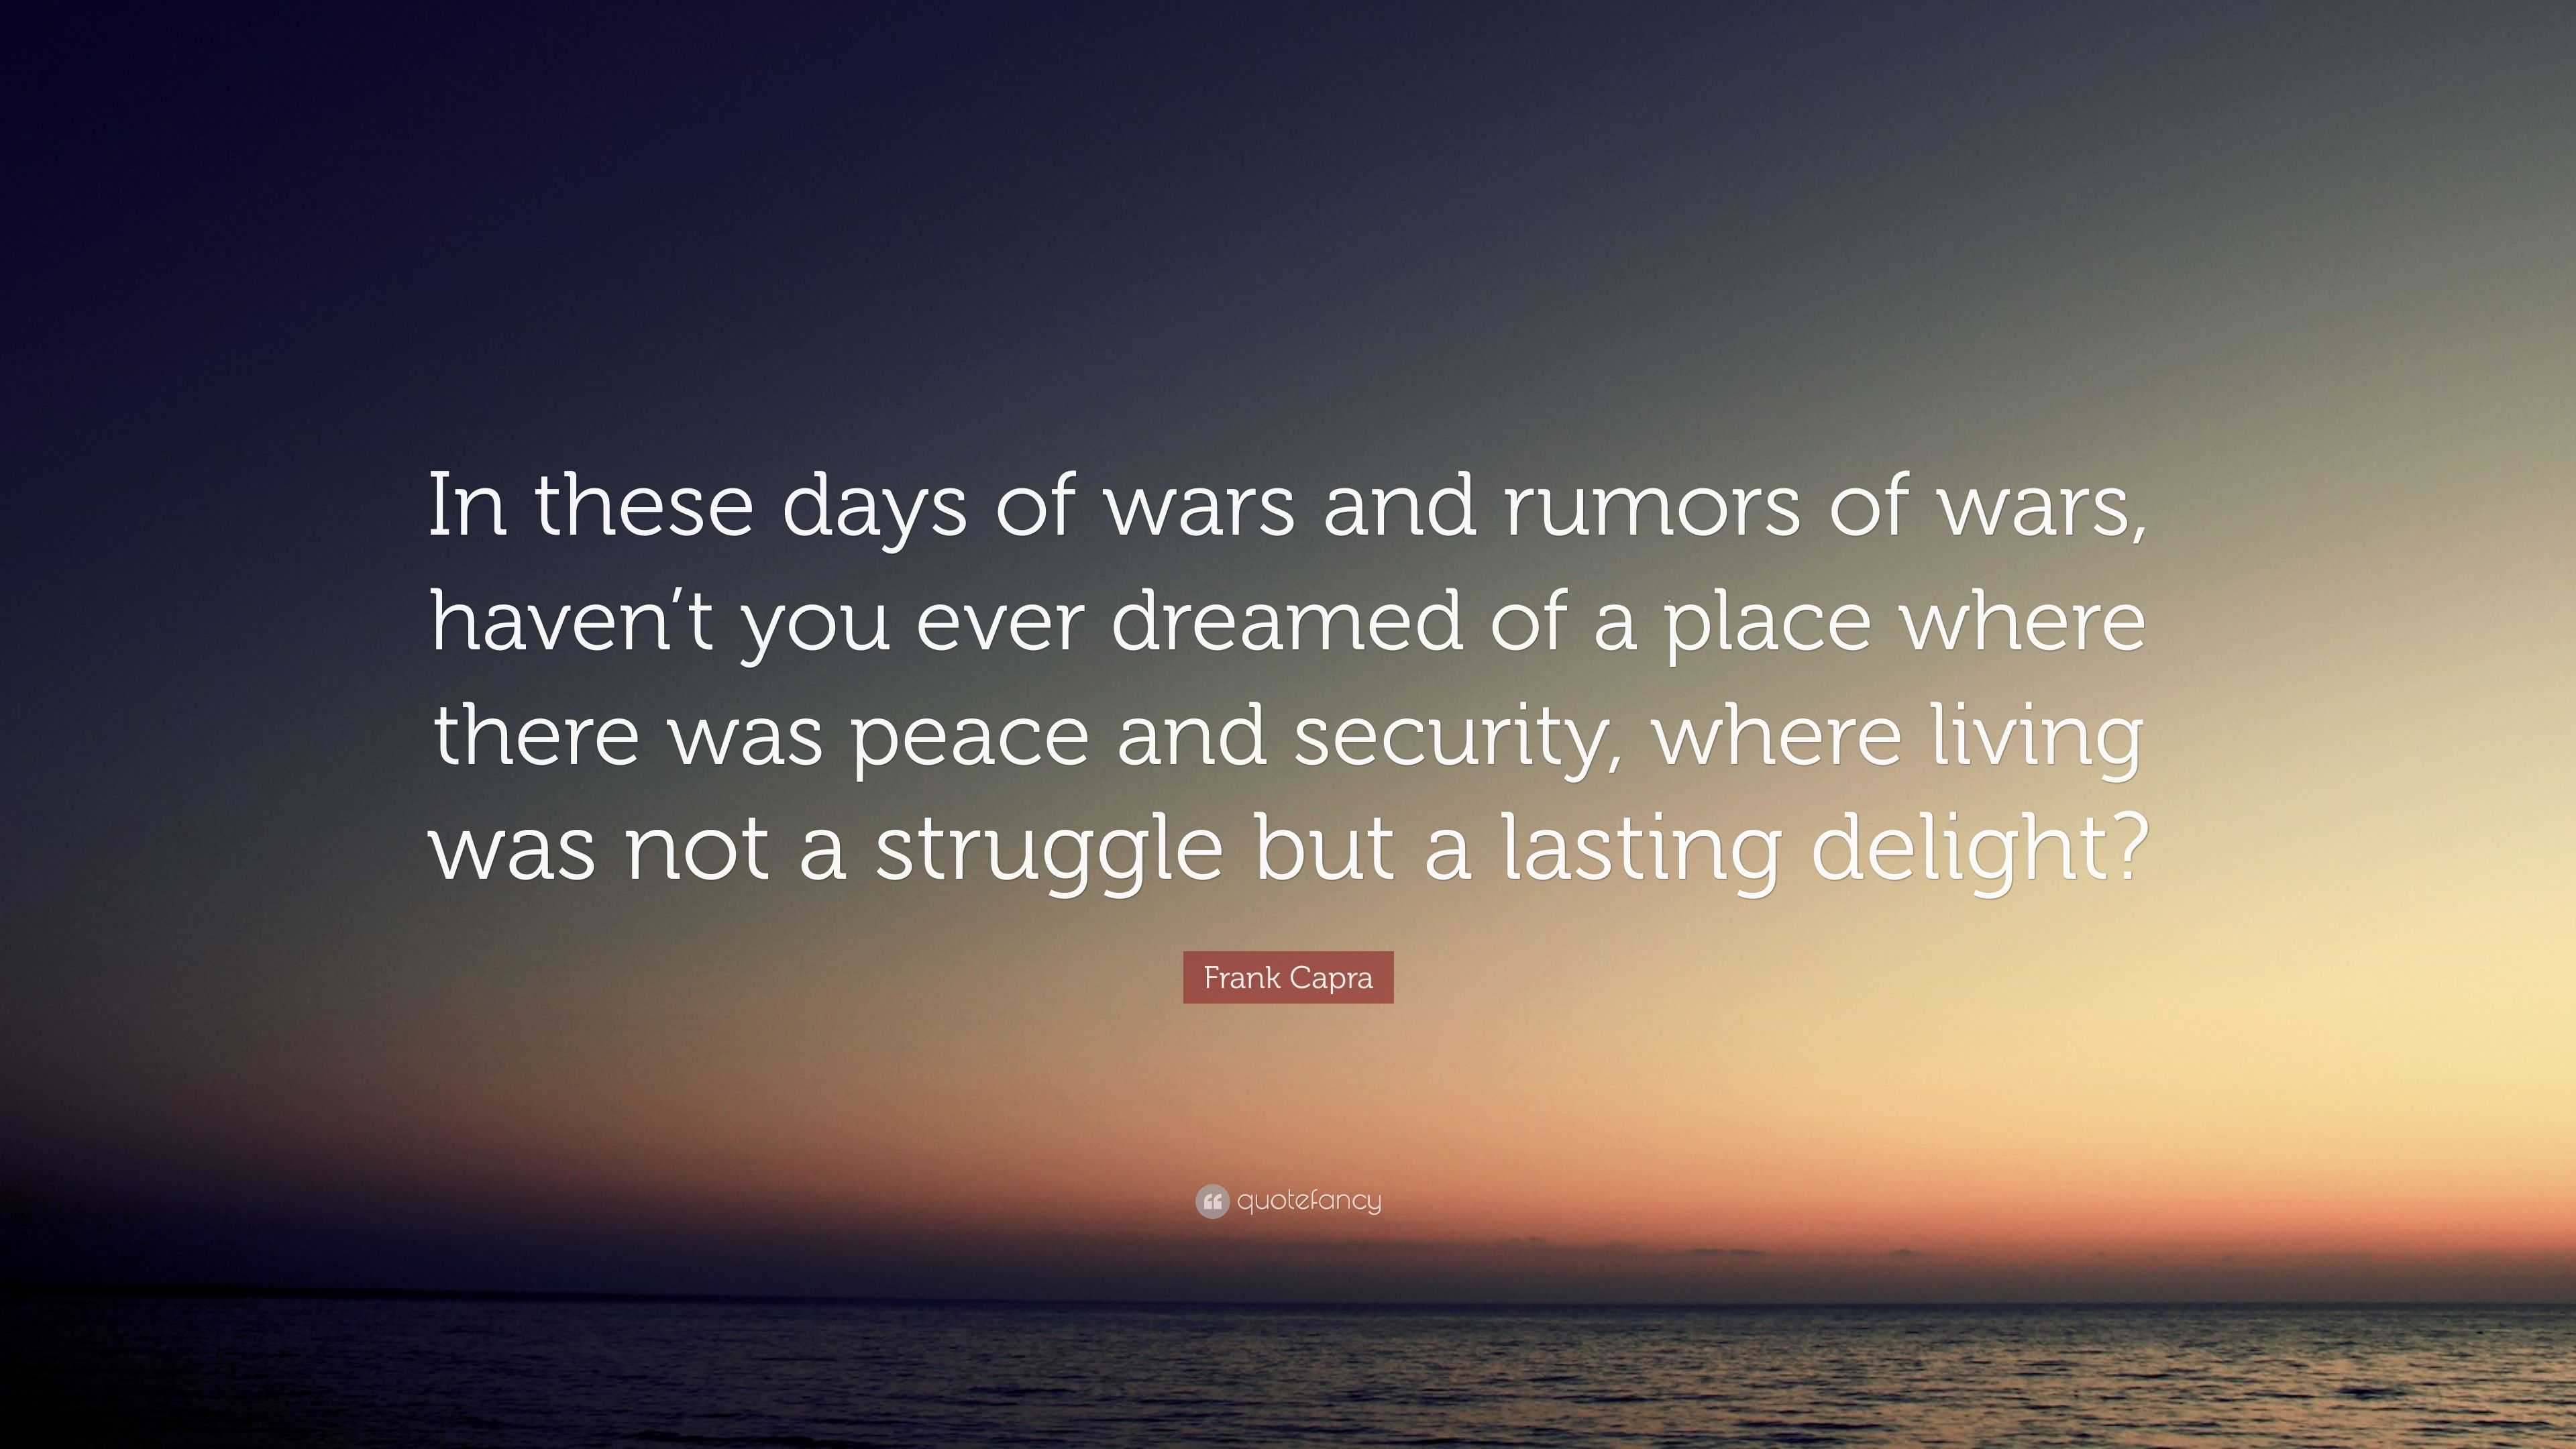 Frank Capra Quote: "In these days of wars and rumors of ...